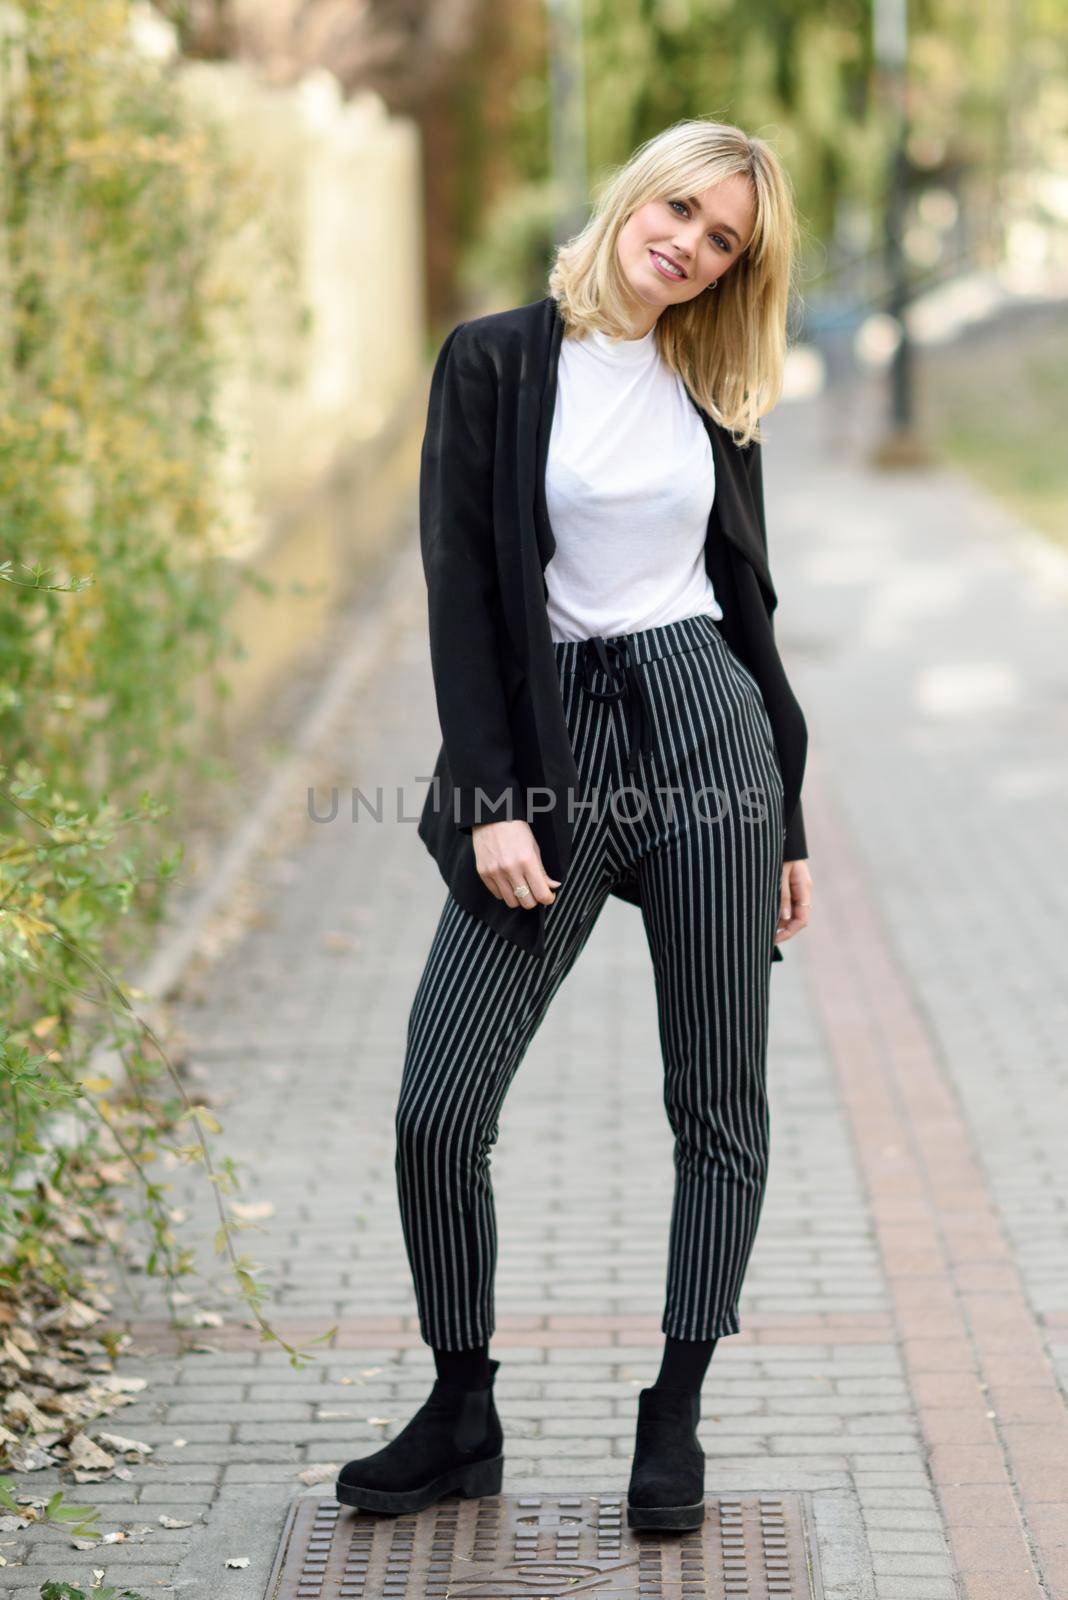 Pretty blonde woman smiling in urban background. Young girl wearing black blazer jacket and striped trousers standing in the street. Pretty female with straight hair hairstyle and blue eyes.